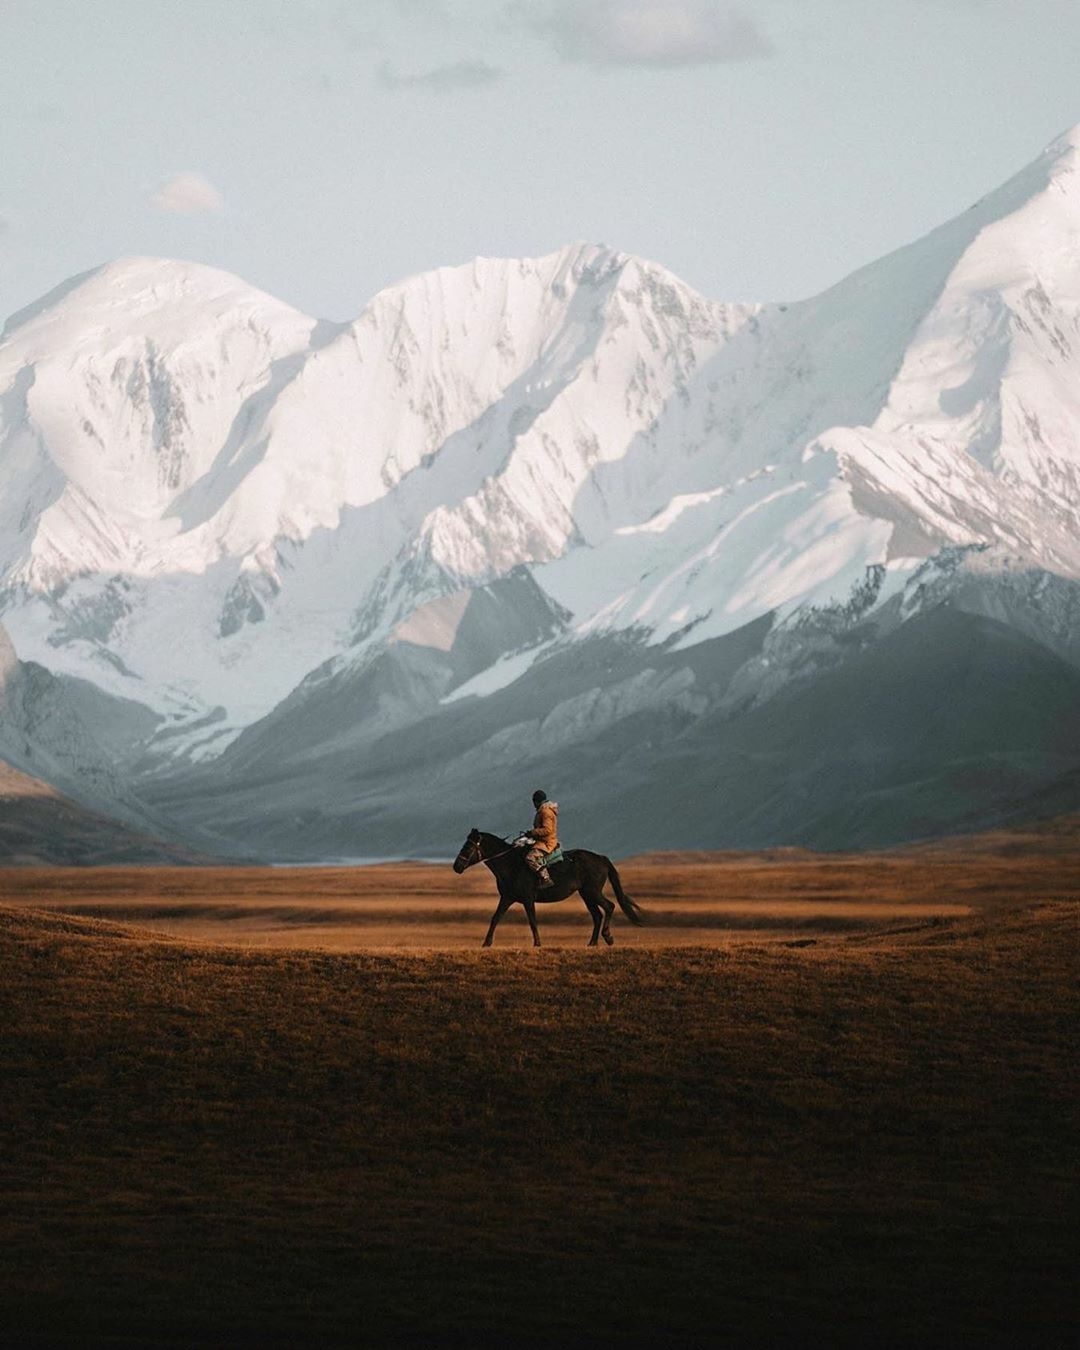 man riding horse with mountains in background